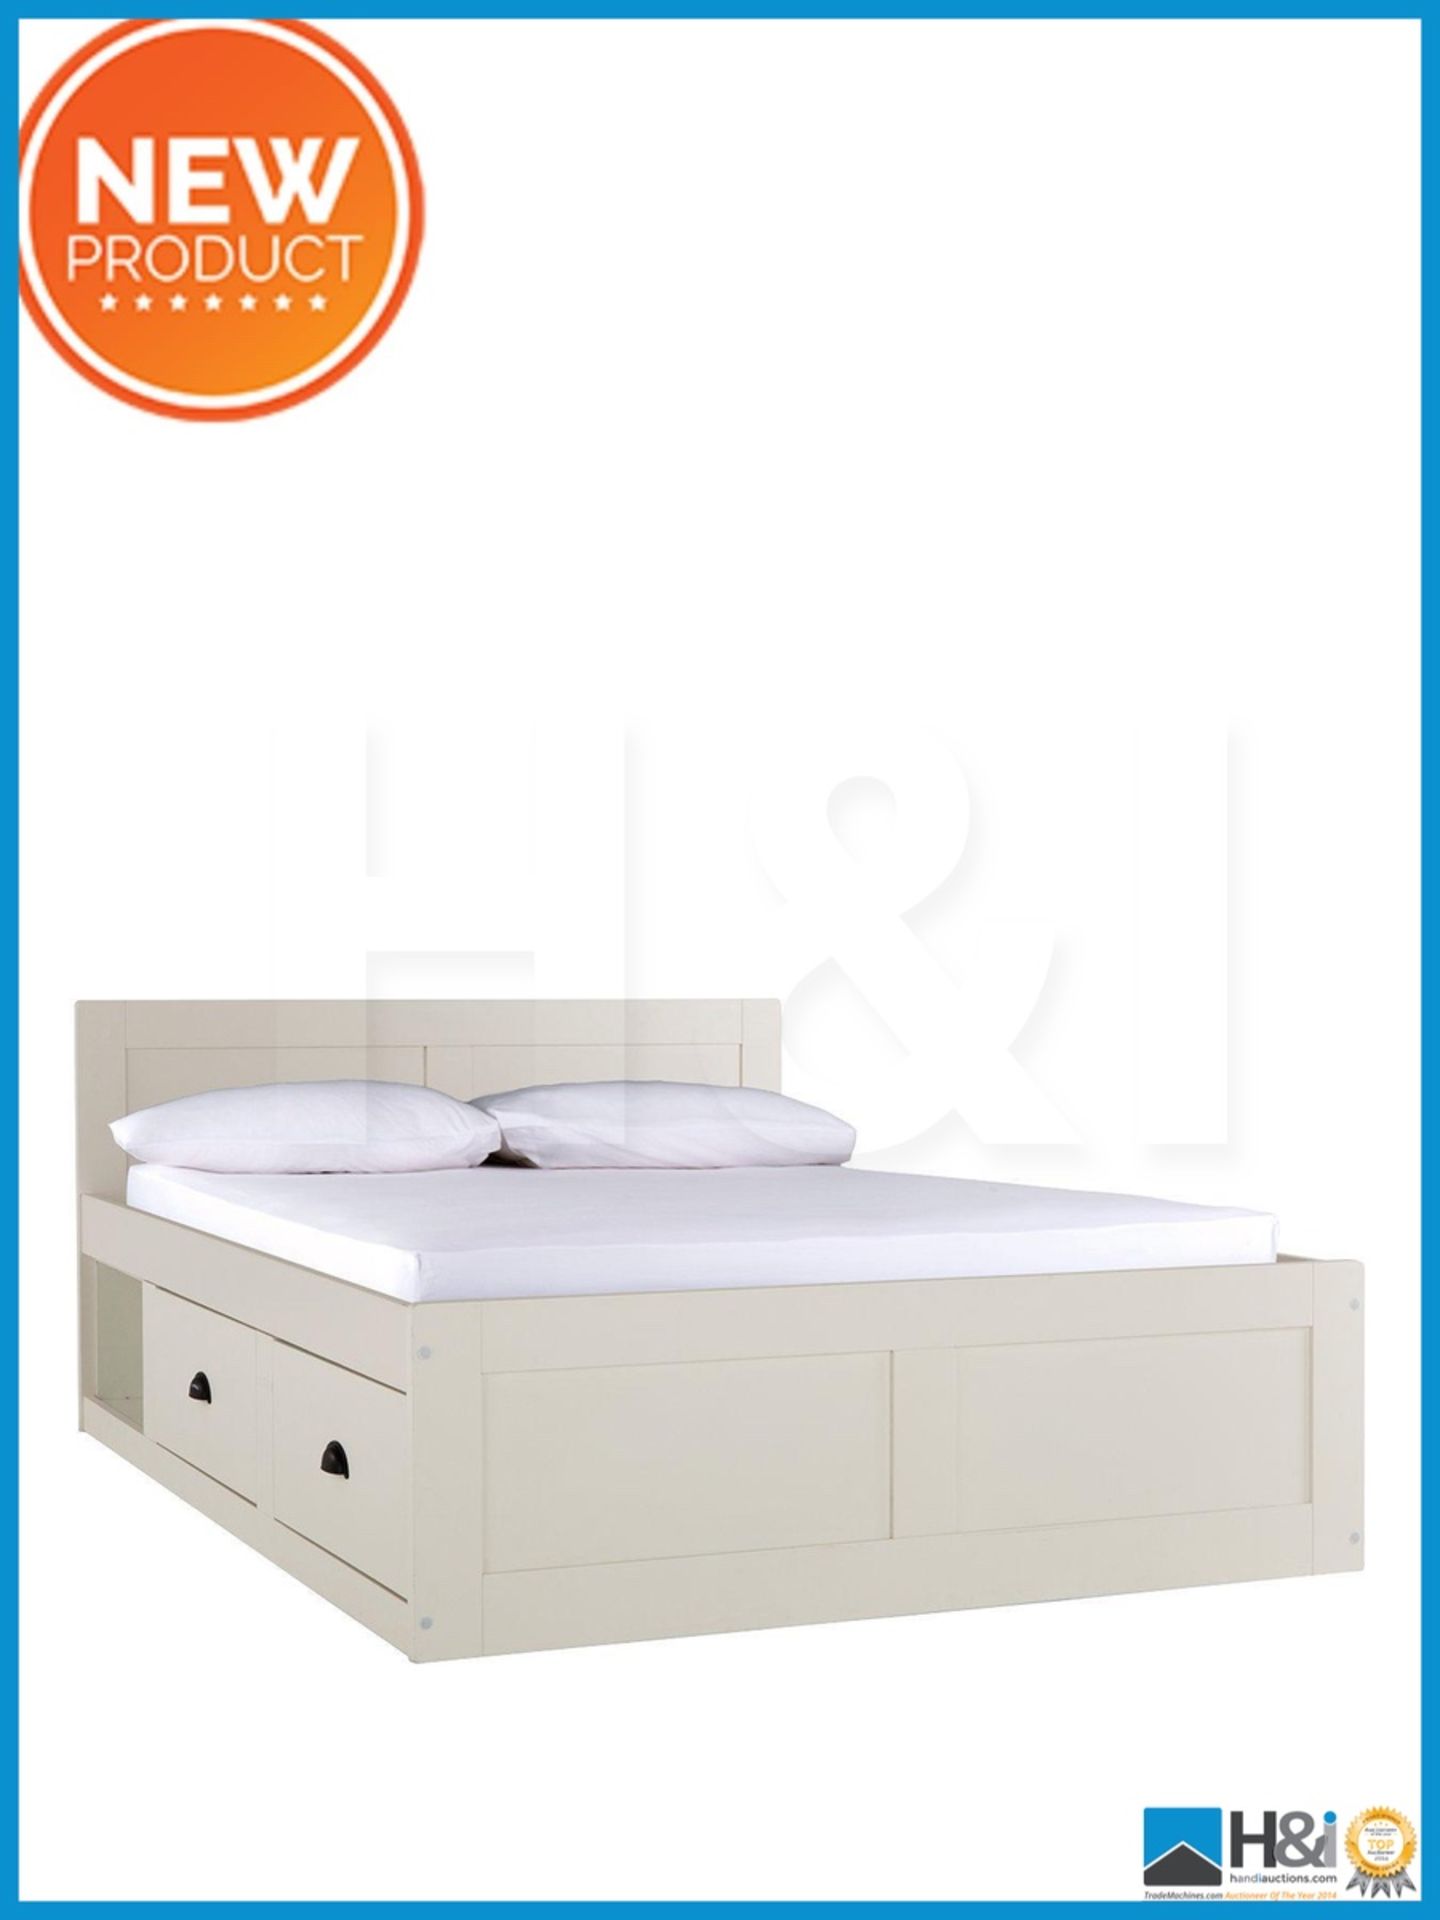 NEW IN BOX PULA DOUBLE STORAGE BED [WHITE] 80 x 142 x 197cm RRP £688 Appraisal: Viewing Essential